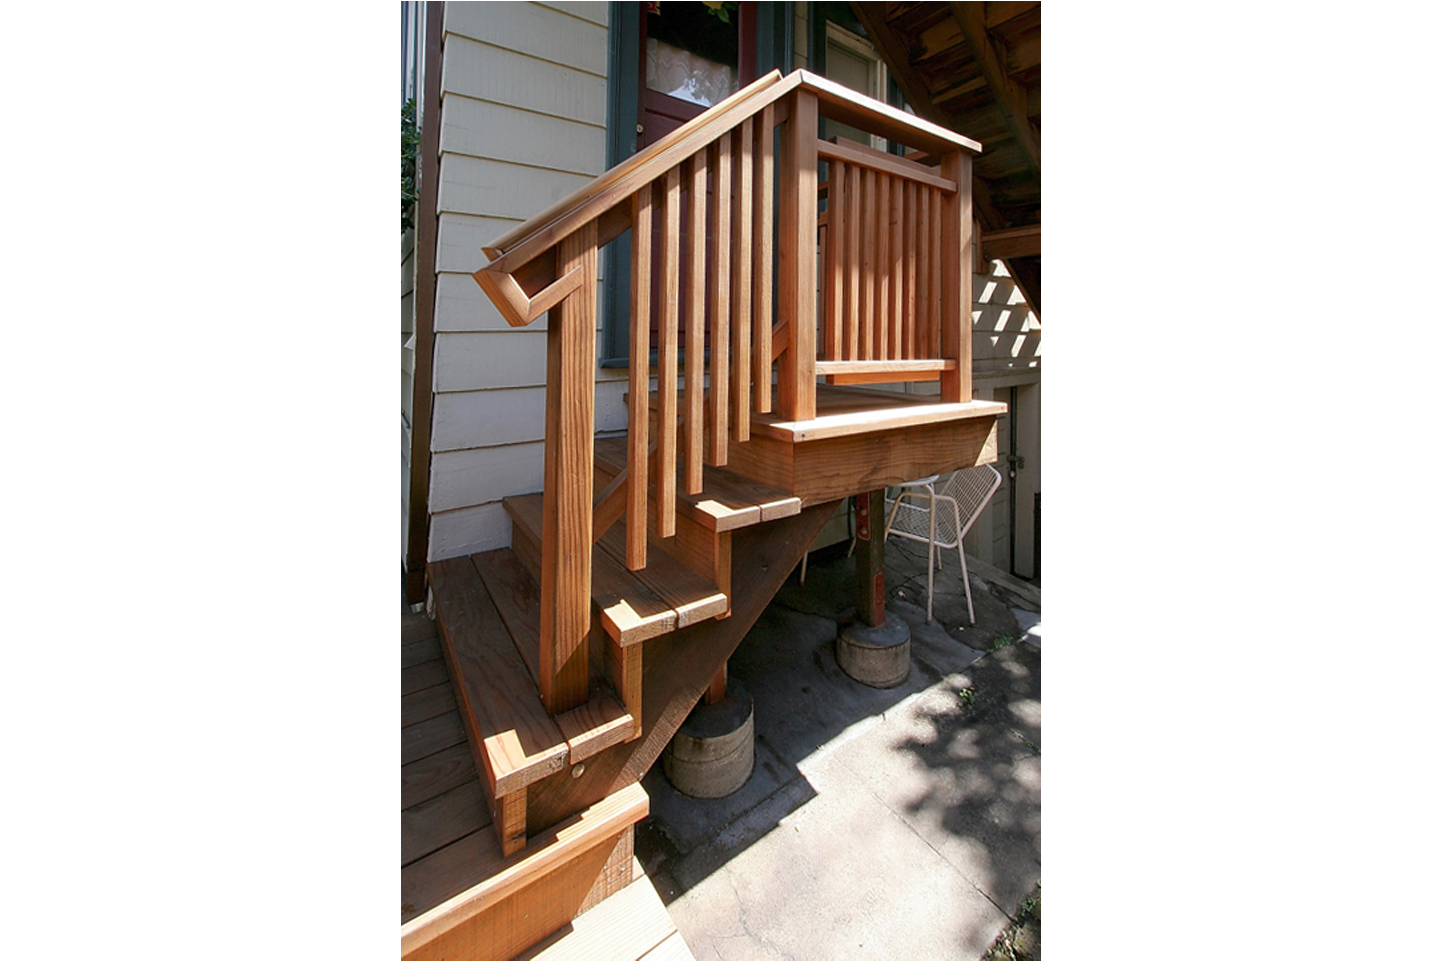 Rear Yard Deck + Stairs lower section